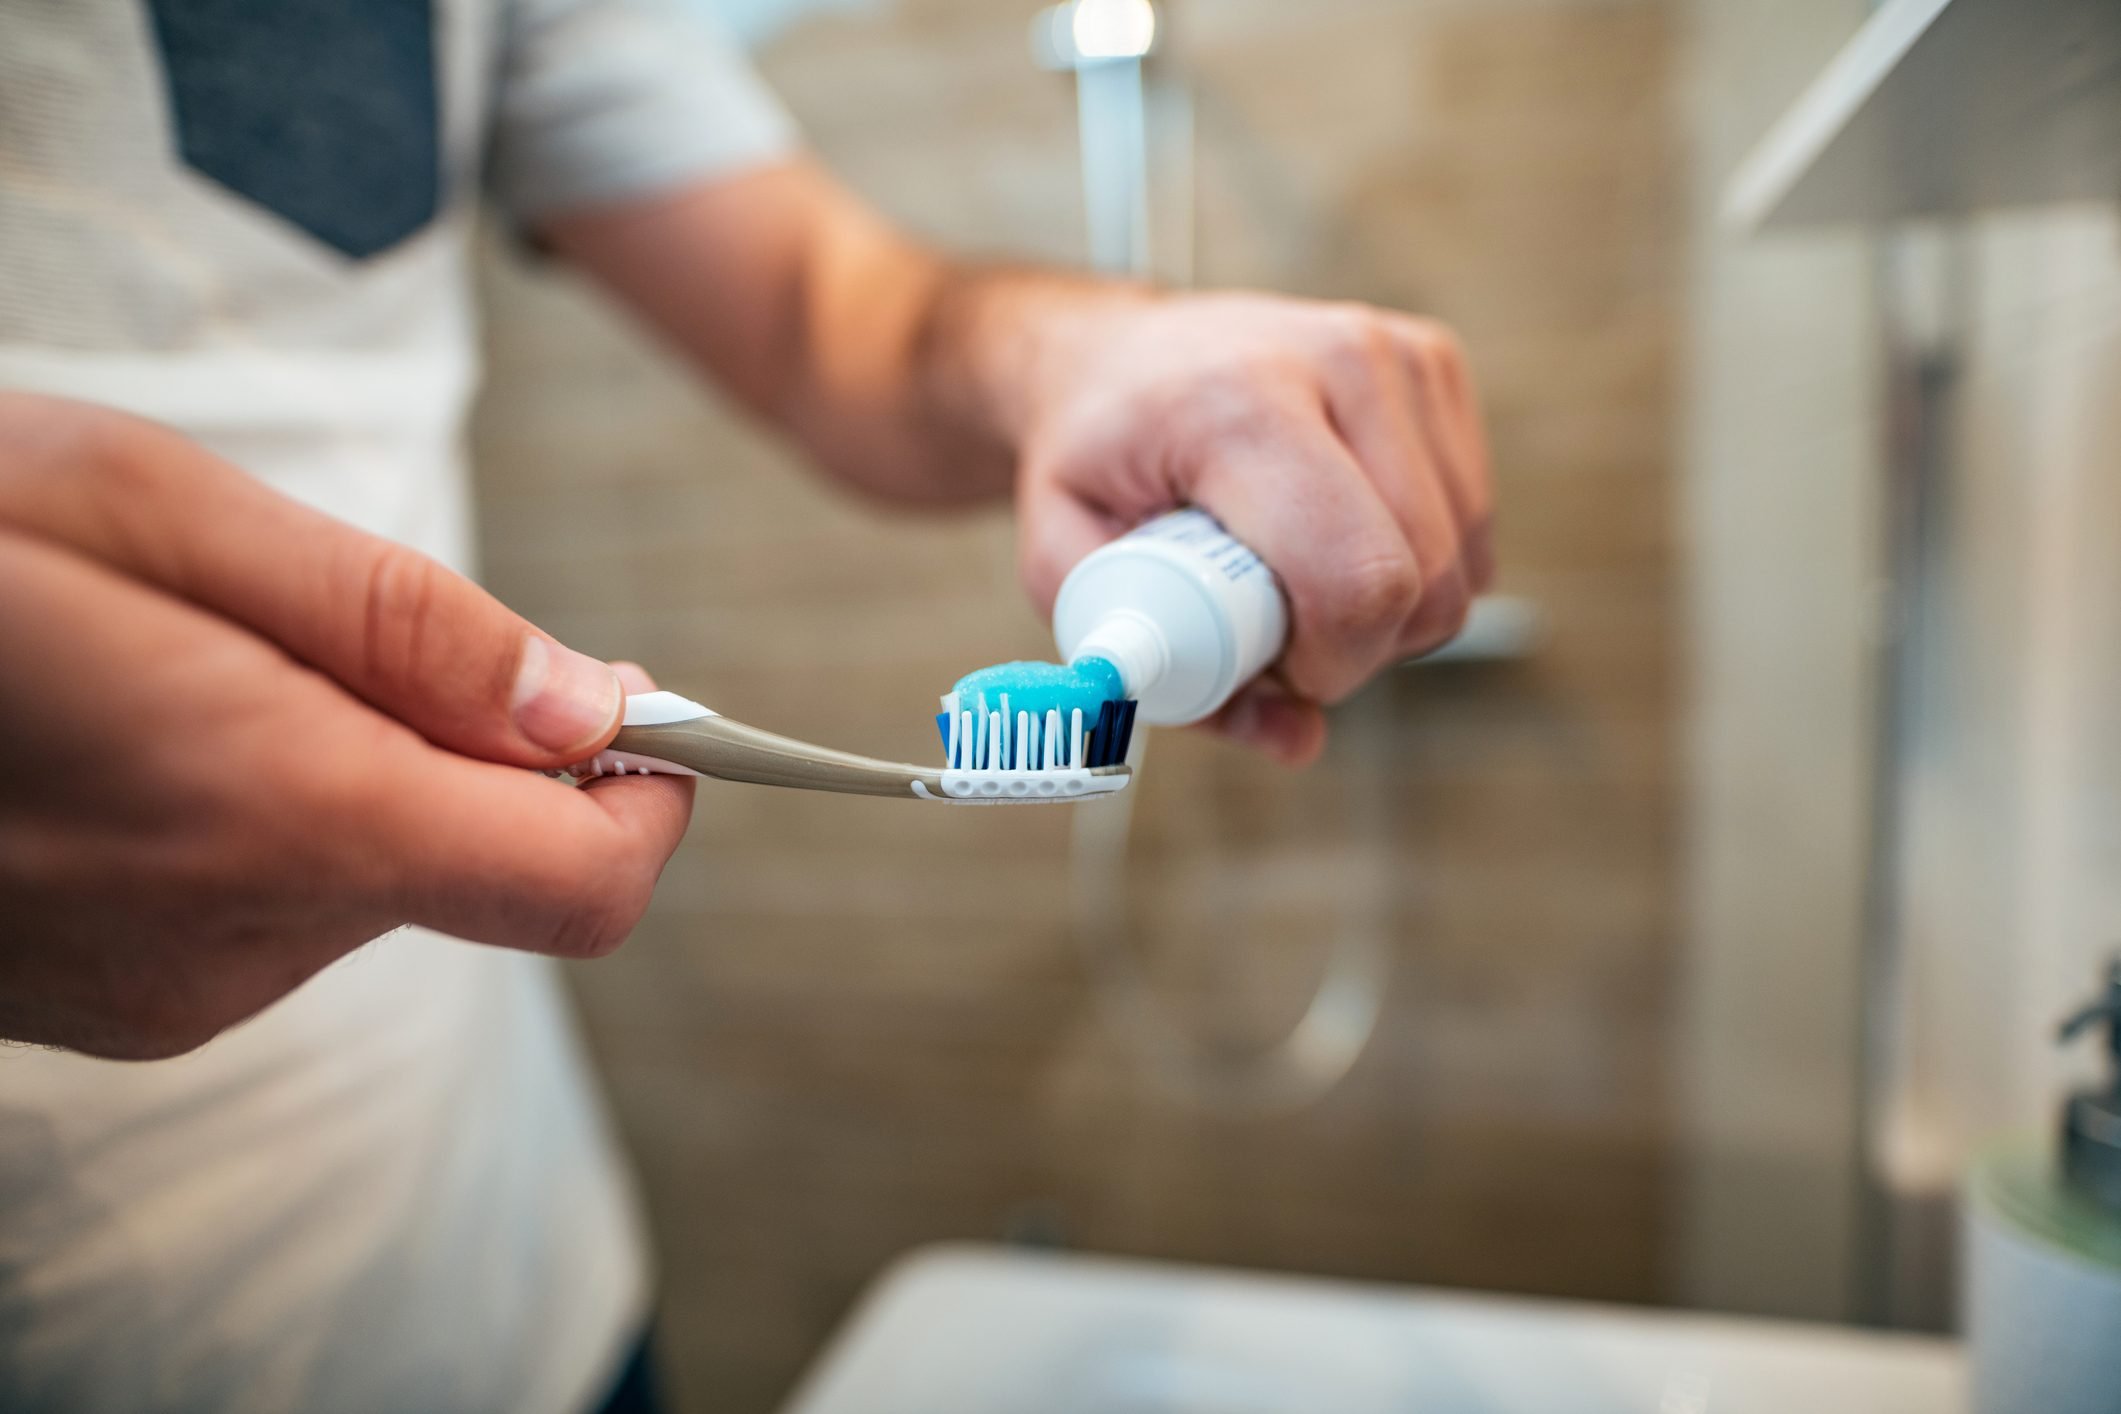 12 Common Teeth-Cleaning Mistakes That Make Dentists Cringe